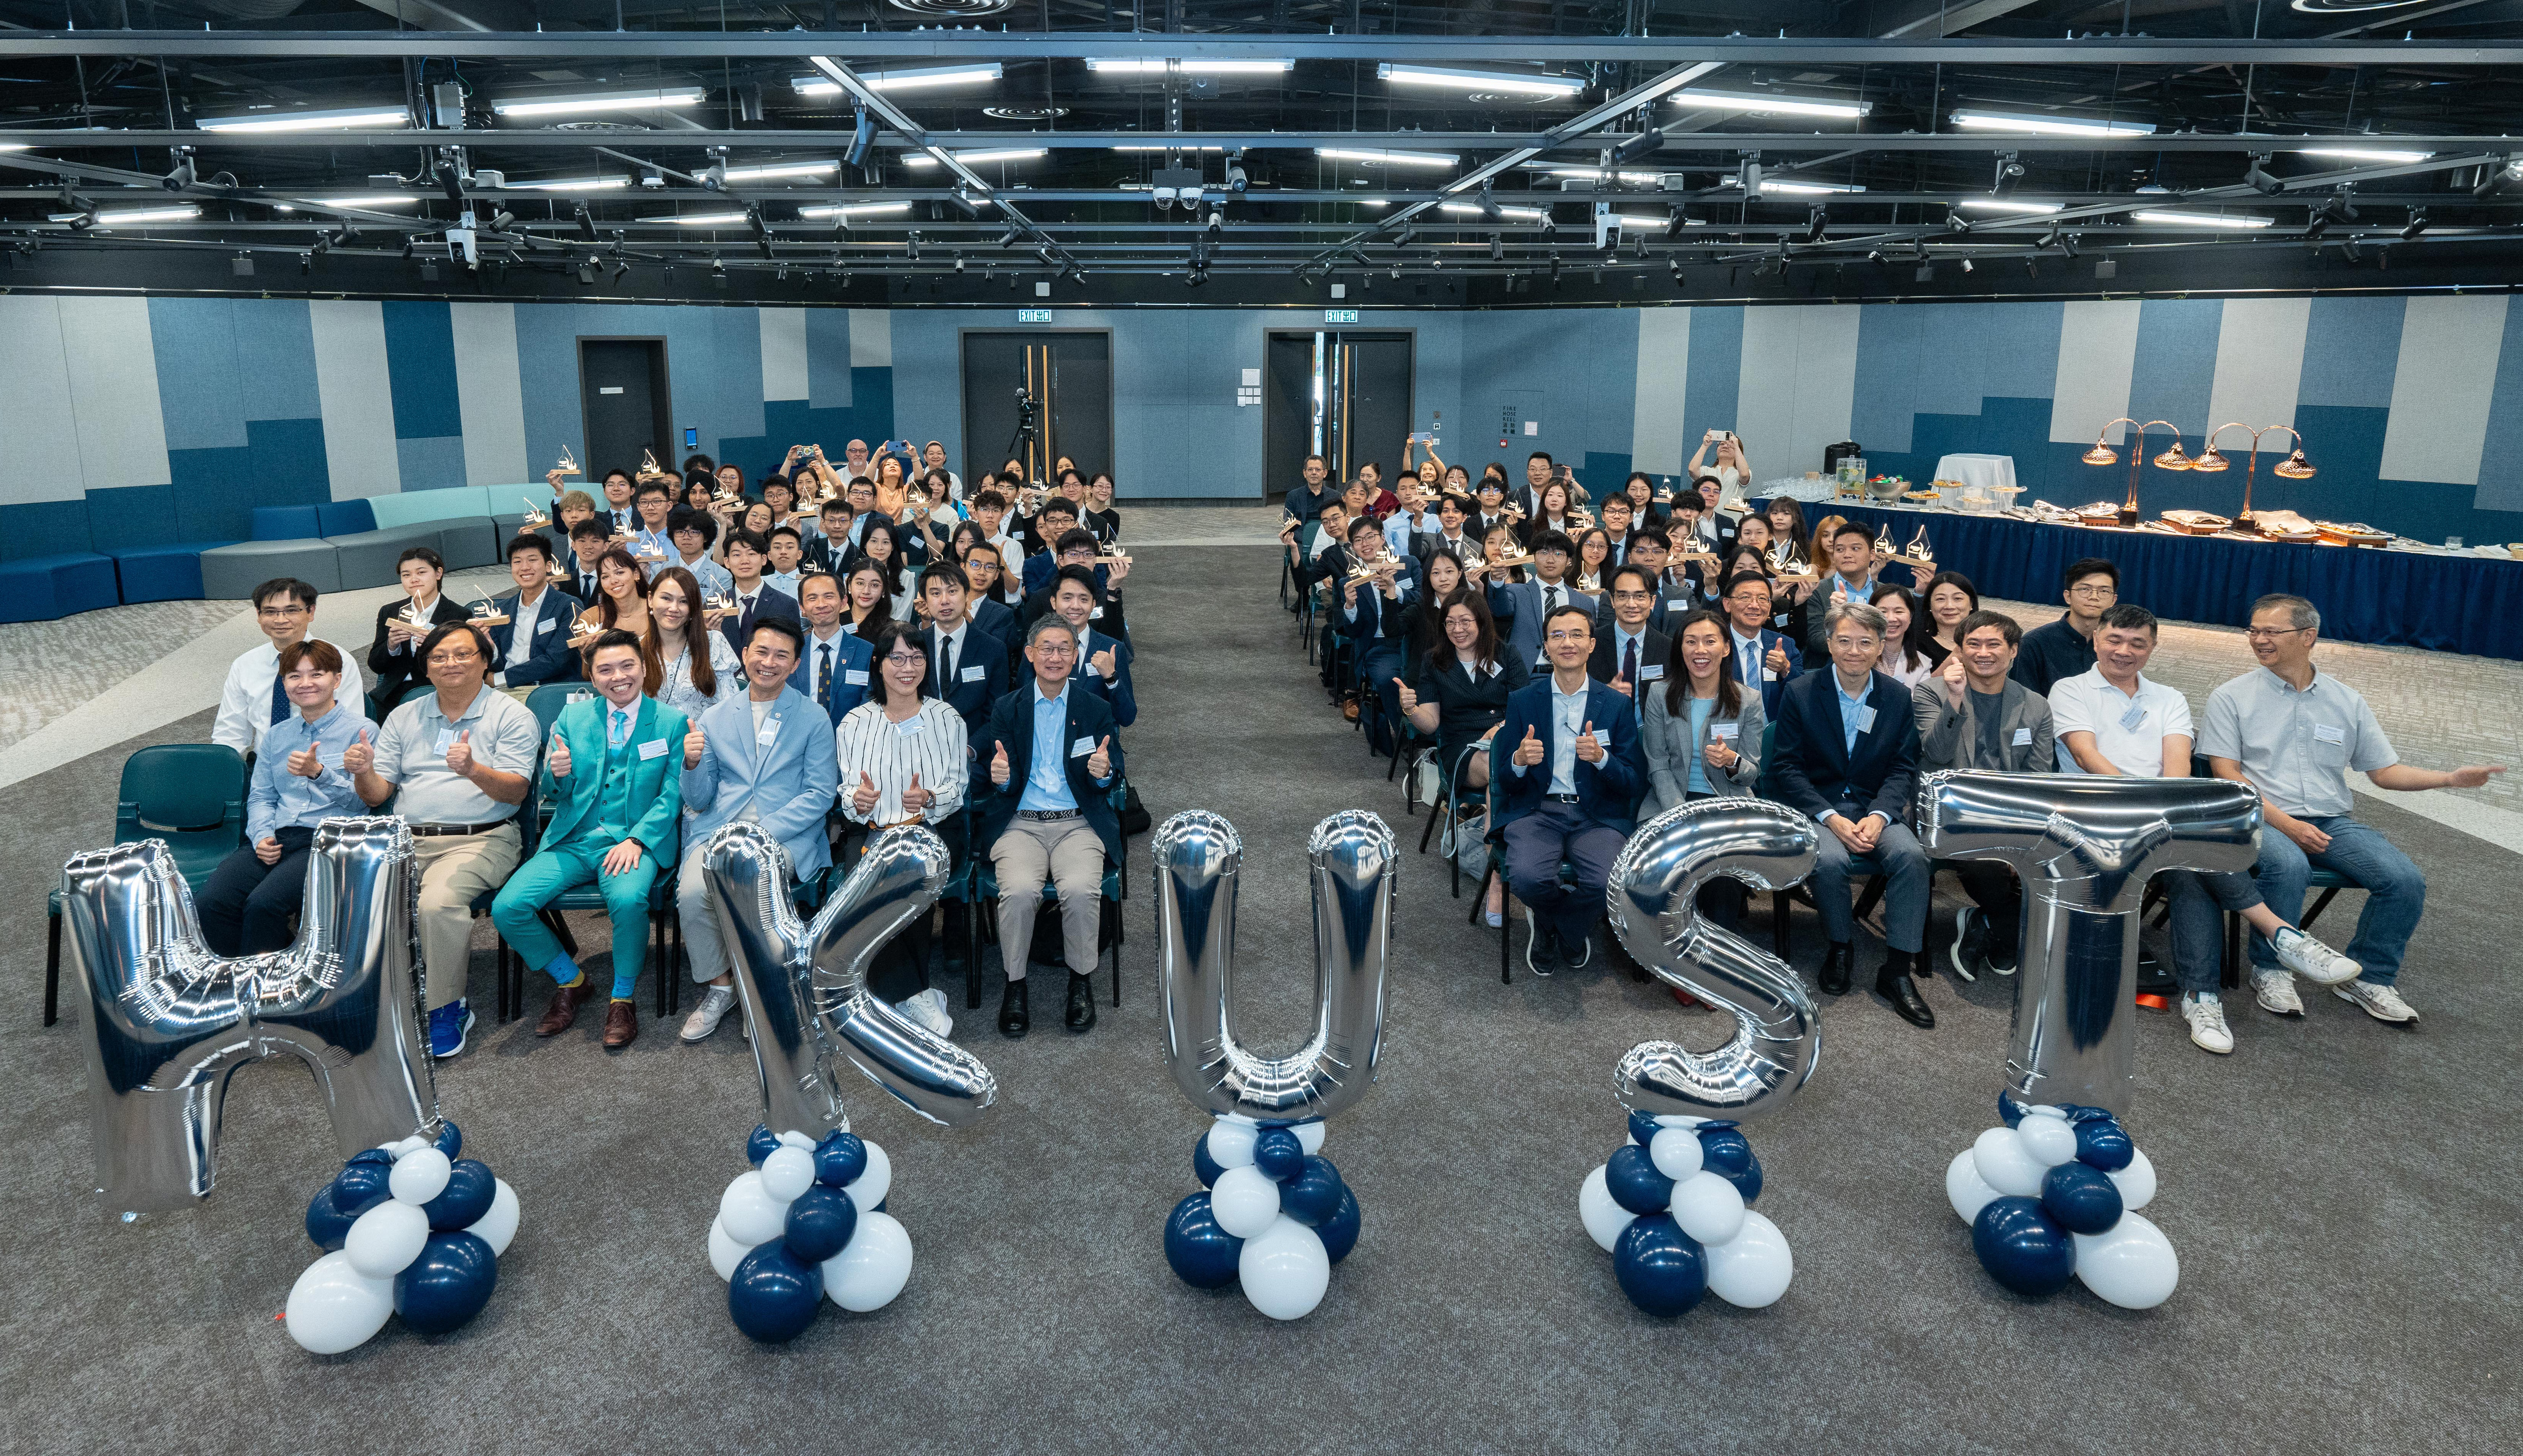 A group photo of over 60 students through the School Nominations Direct Admission Scheme (SNDAS) and the Student-Athlete Learning Support and Admission Scheme (SALSA), HKUST Associate Provost (Teaching & Learning) Prof. Jimmy FUNG (first row, sixth right), HKUST Undergraduate Recruitment & Admissions Director Prof. Emily NASON (first row, fifth right), secondary school principals, teachers as well as representatives from the Hong Kong Sports Institute and the Hong Kong, China Table Tennis Association.